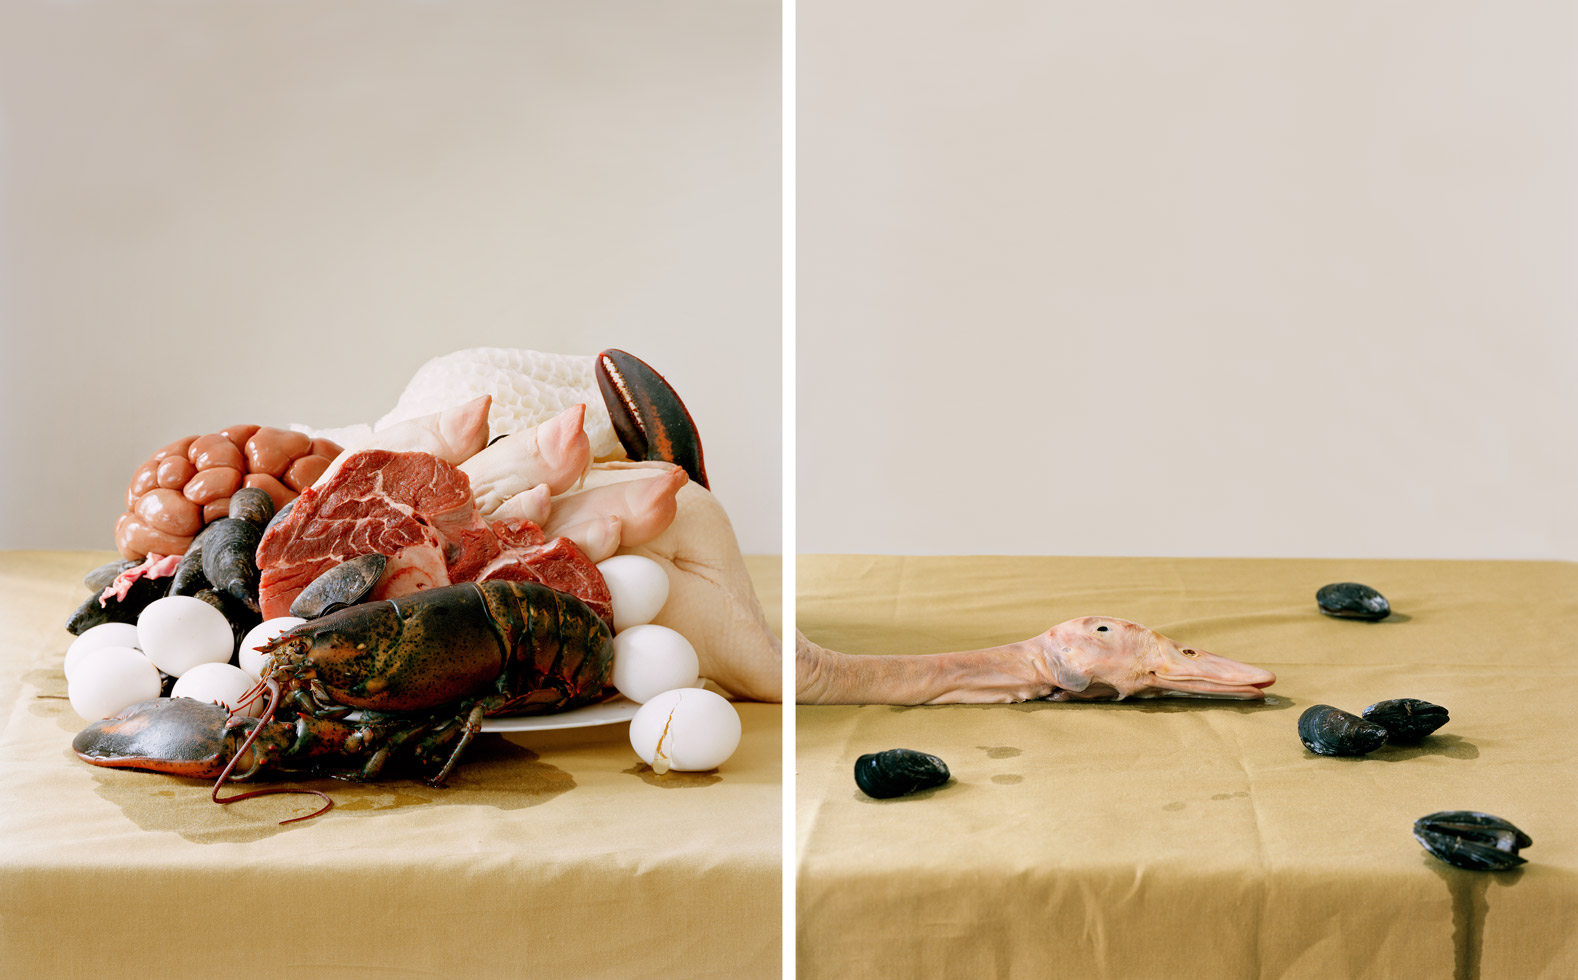 Untitled No. 3 (from the series 'Lessons of Impermanence'), 2009